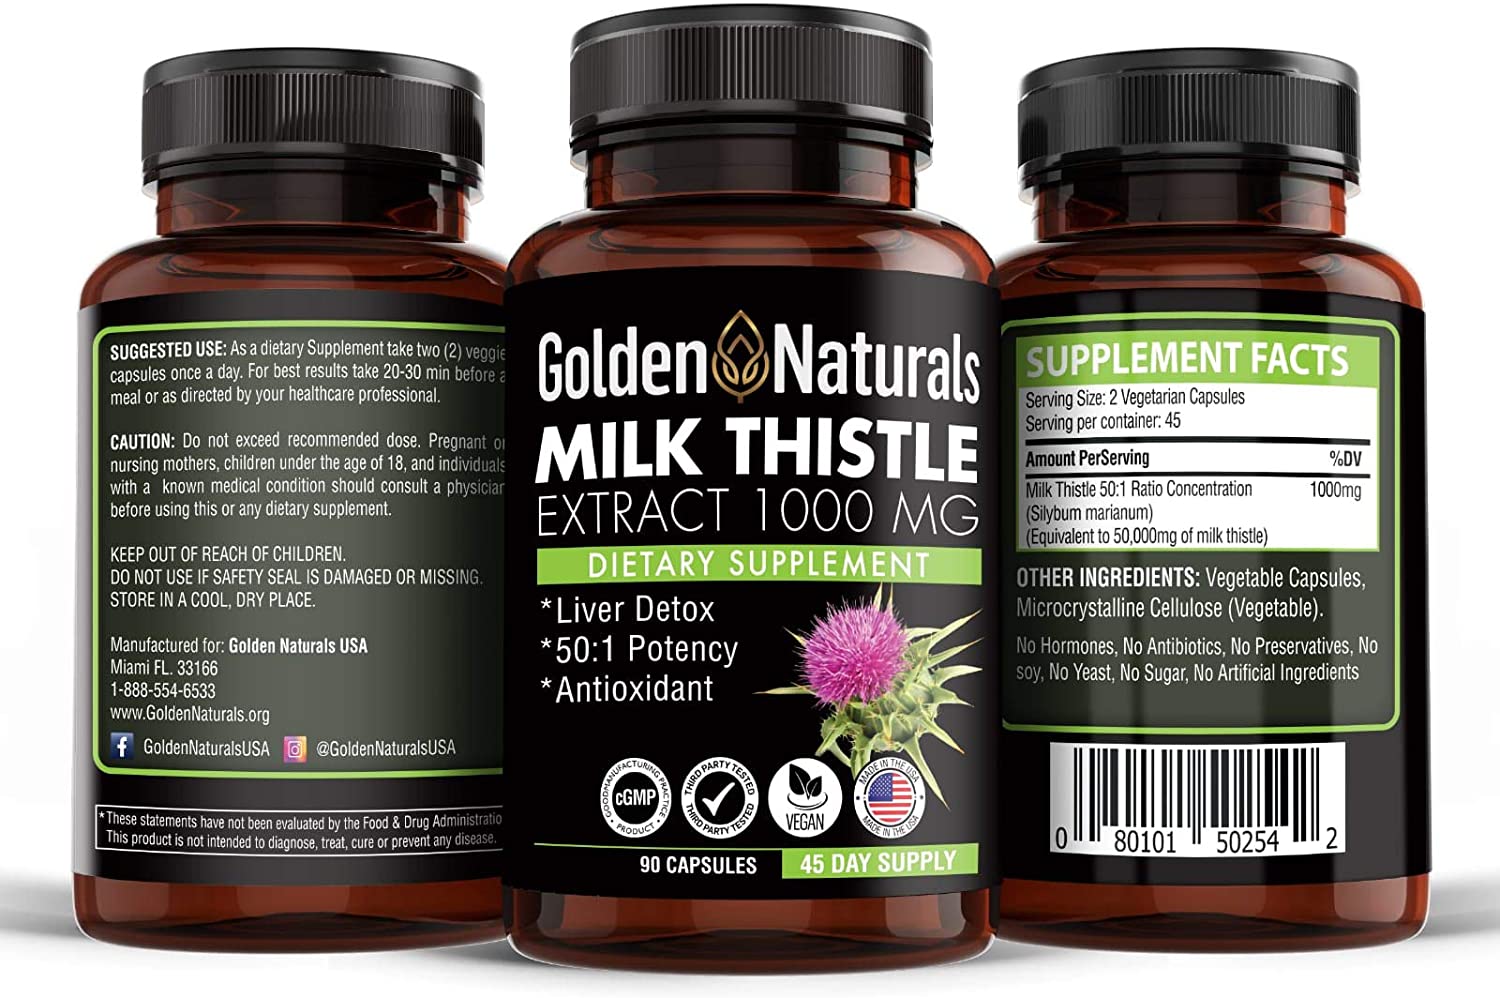 Organic Milk Thistle 1000 Milligram, Highly Potent 50:1 (Silymarin Marianum) Concentrated Extract for Liver Care and Detox, 90 Veggie Capsules